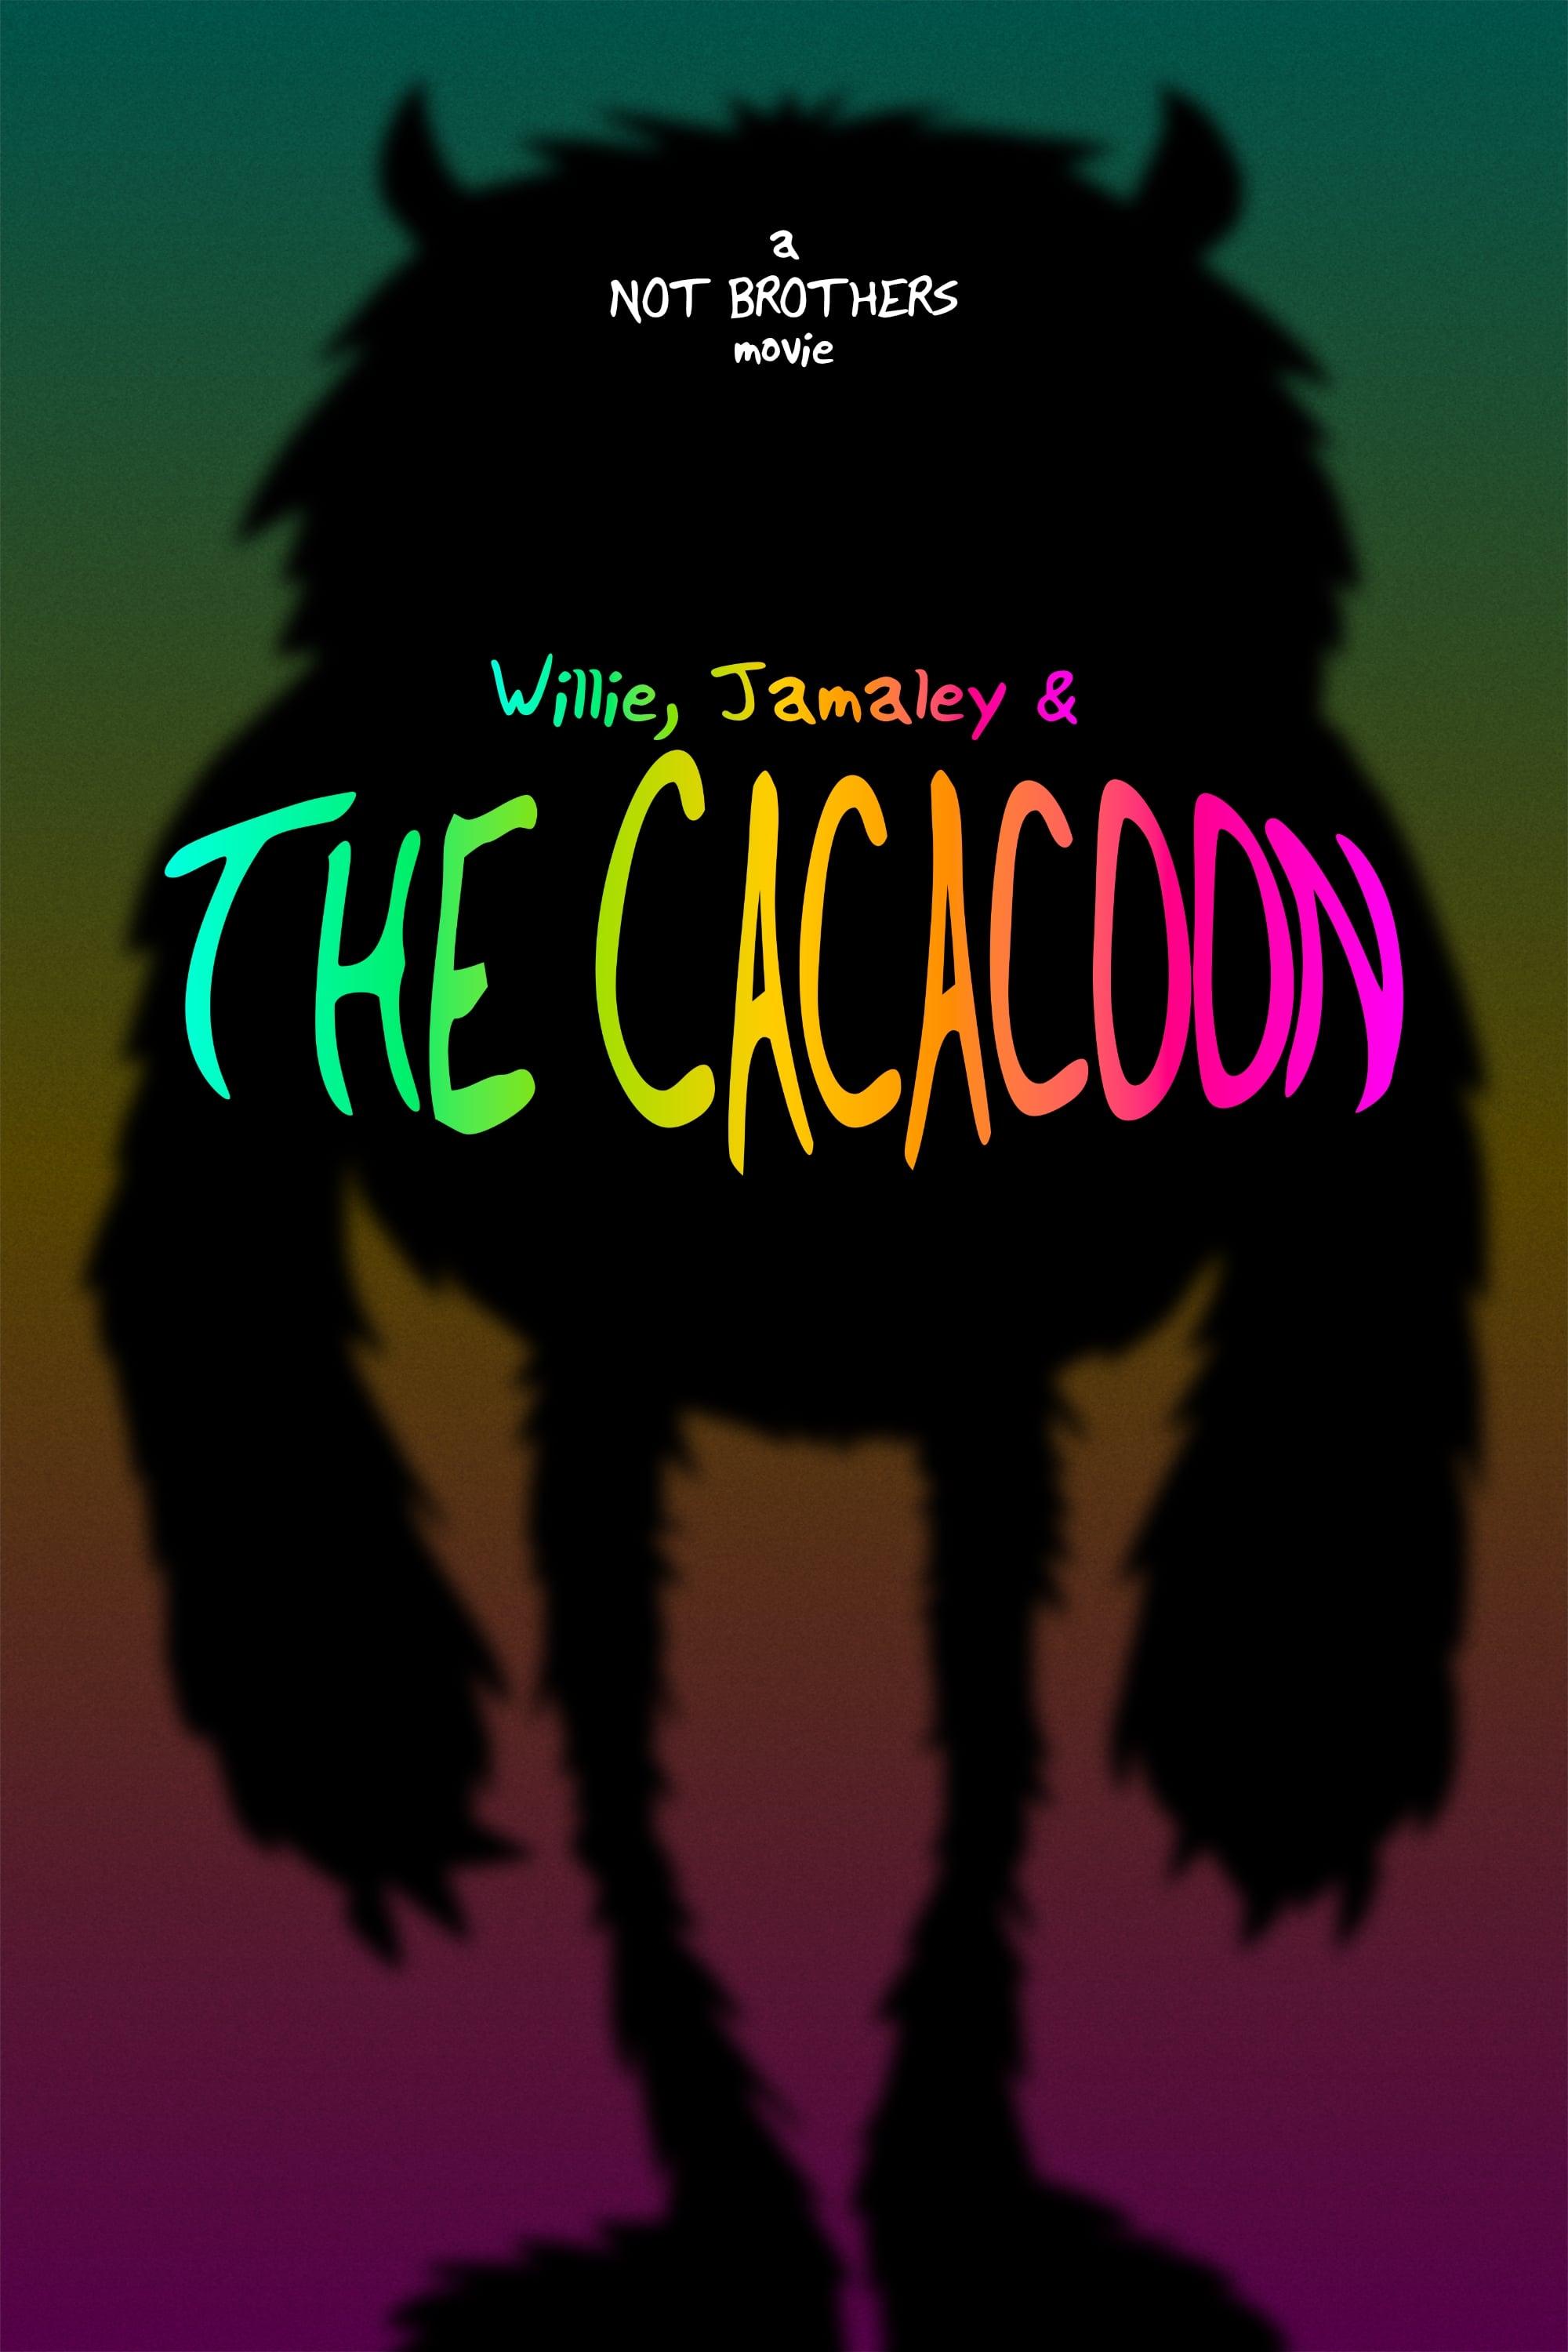 Willie, Jamaley & The Cacacoon poster